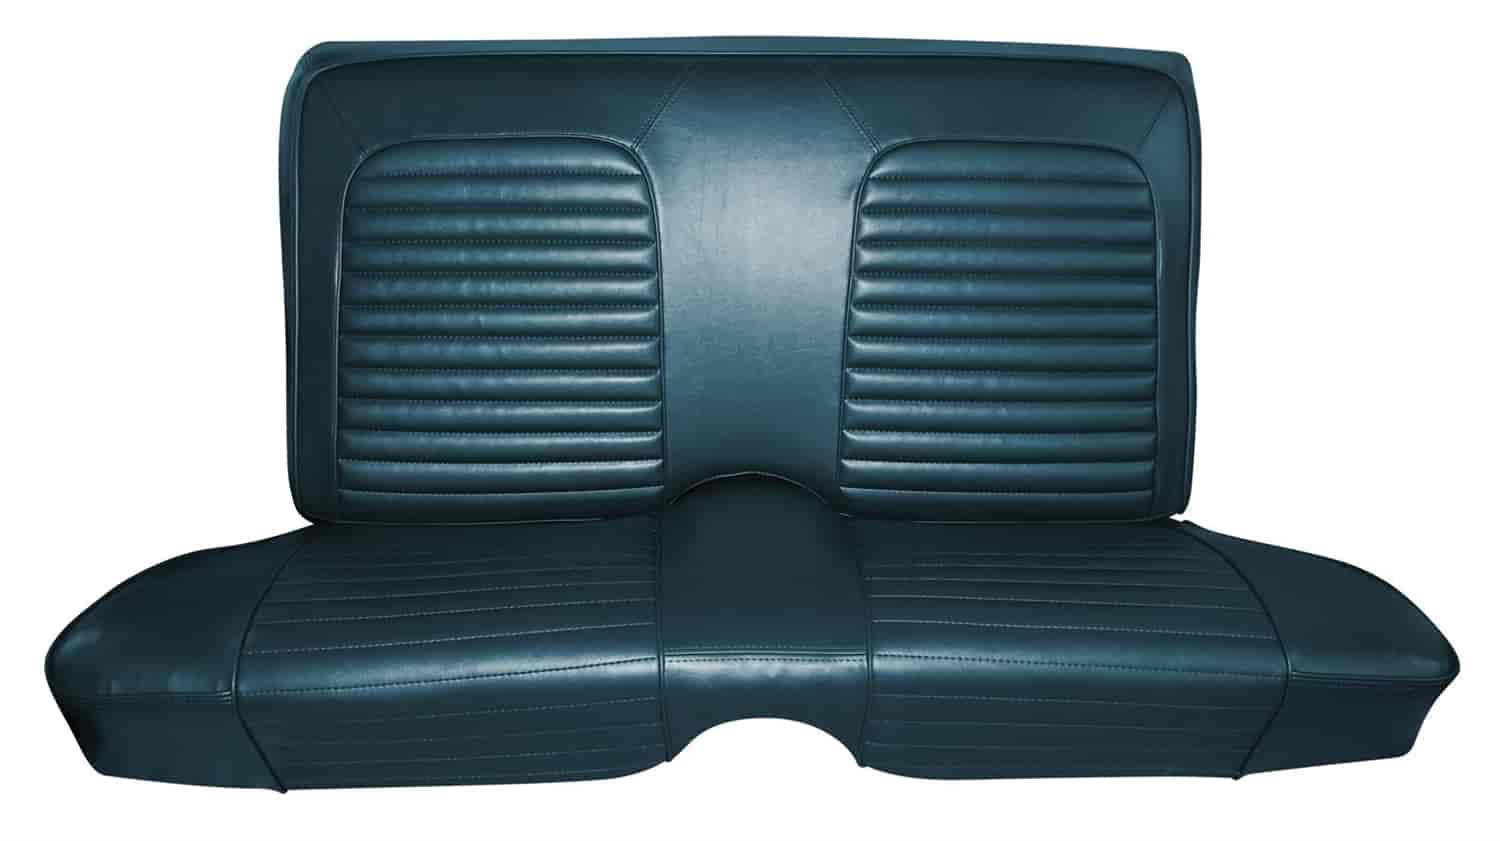 1964 Ford Falcon Futura Convertible Two-Tone Deluxe Interior Front and Rear Bench Seat Upholstery Set